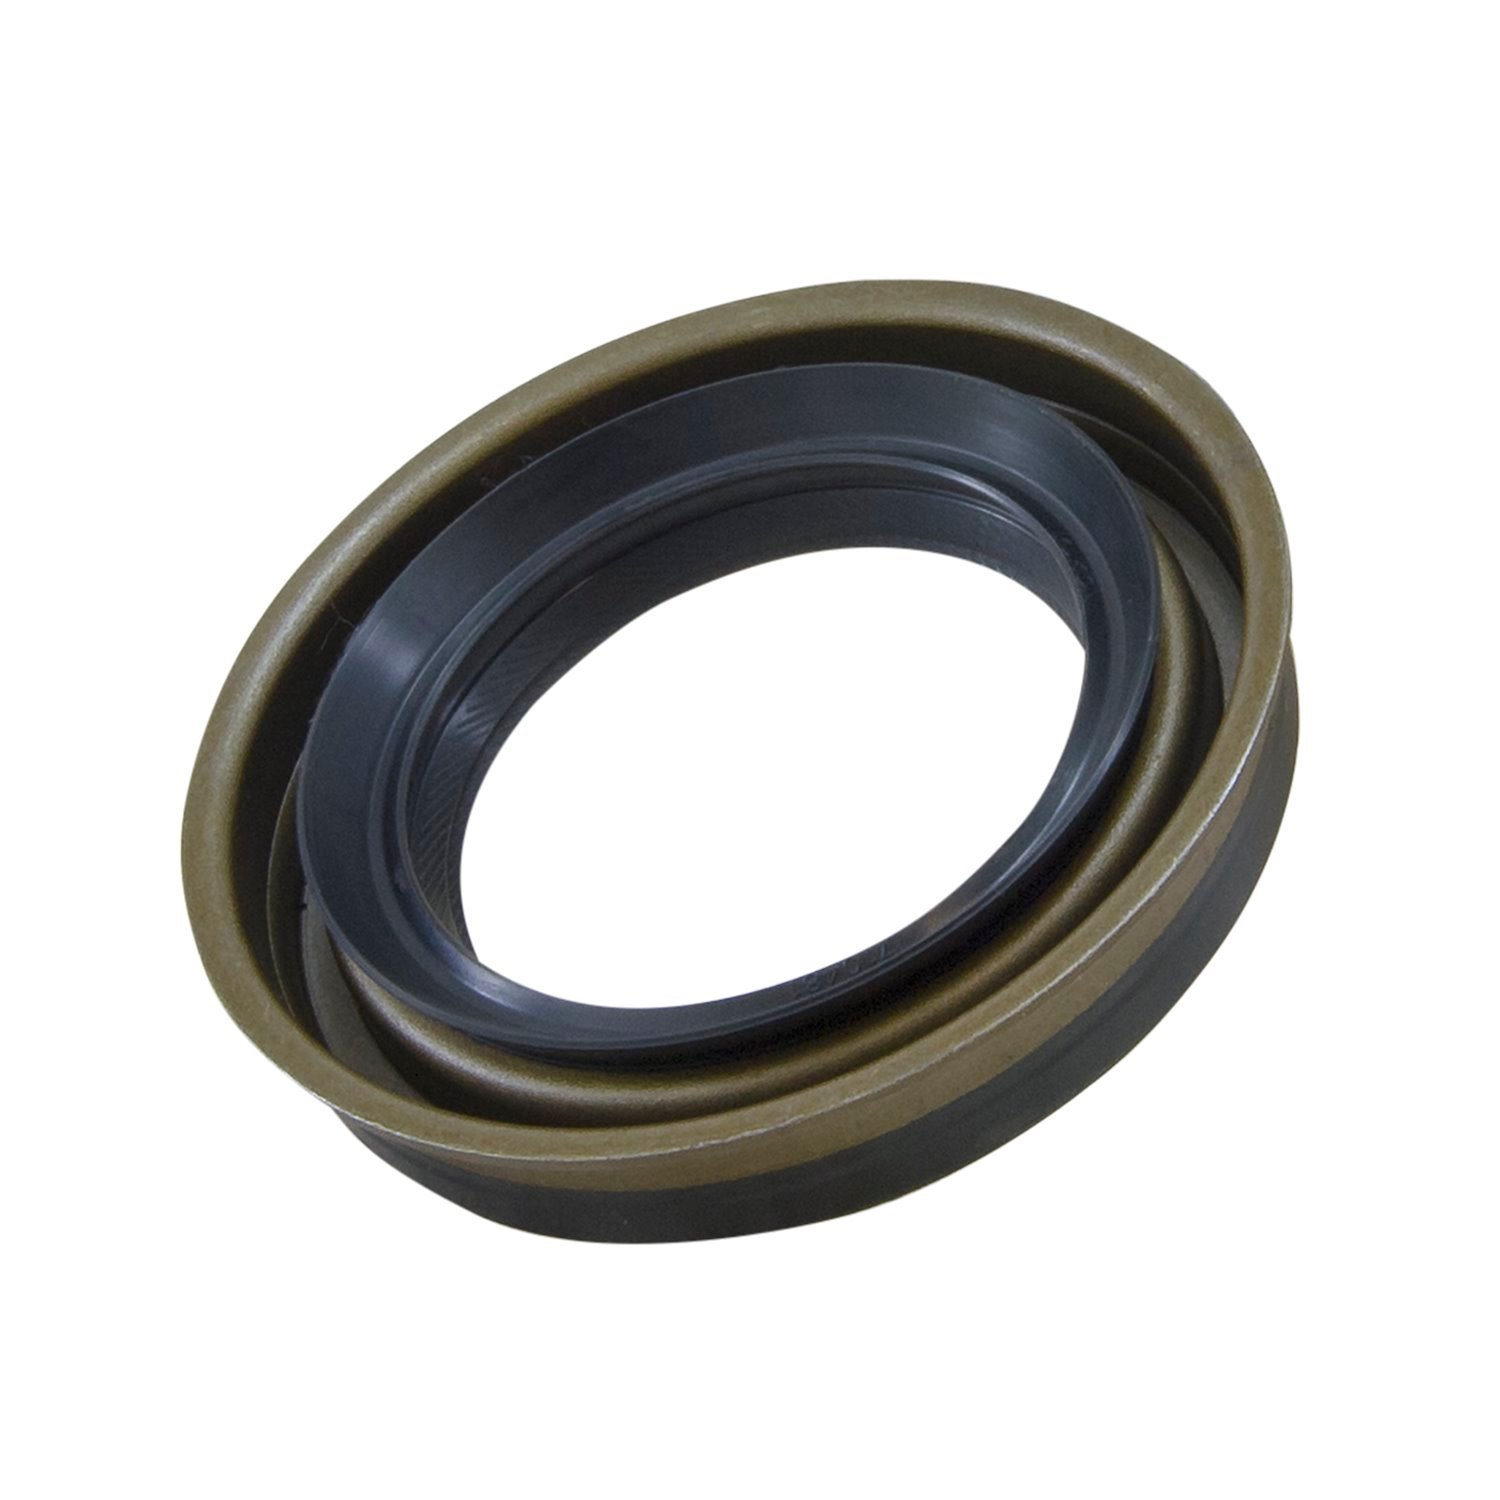 Pinion Seal For 8.75 in. Chrysler Or For 9.25 in. Chrysler With 41 Or 89 Housing